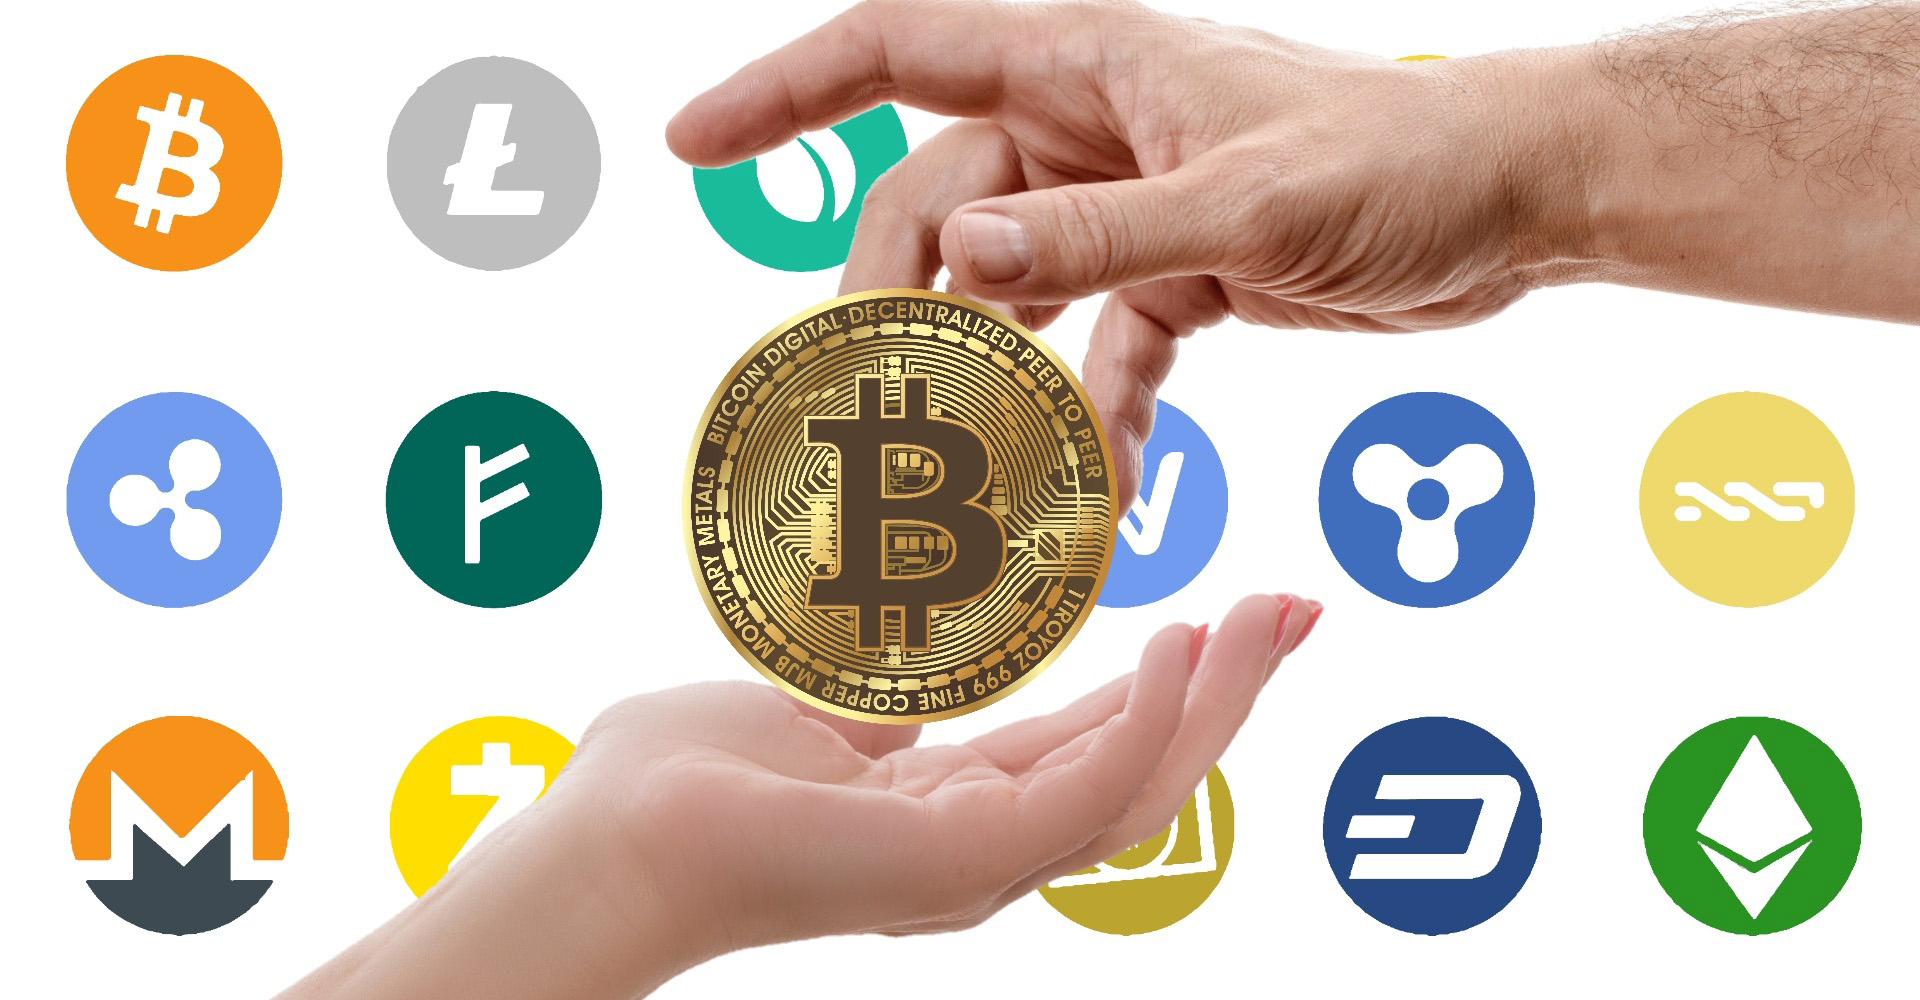 Getting Started With Cryptocurrencies 2021